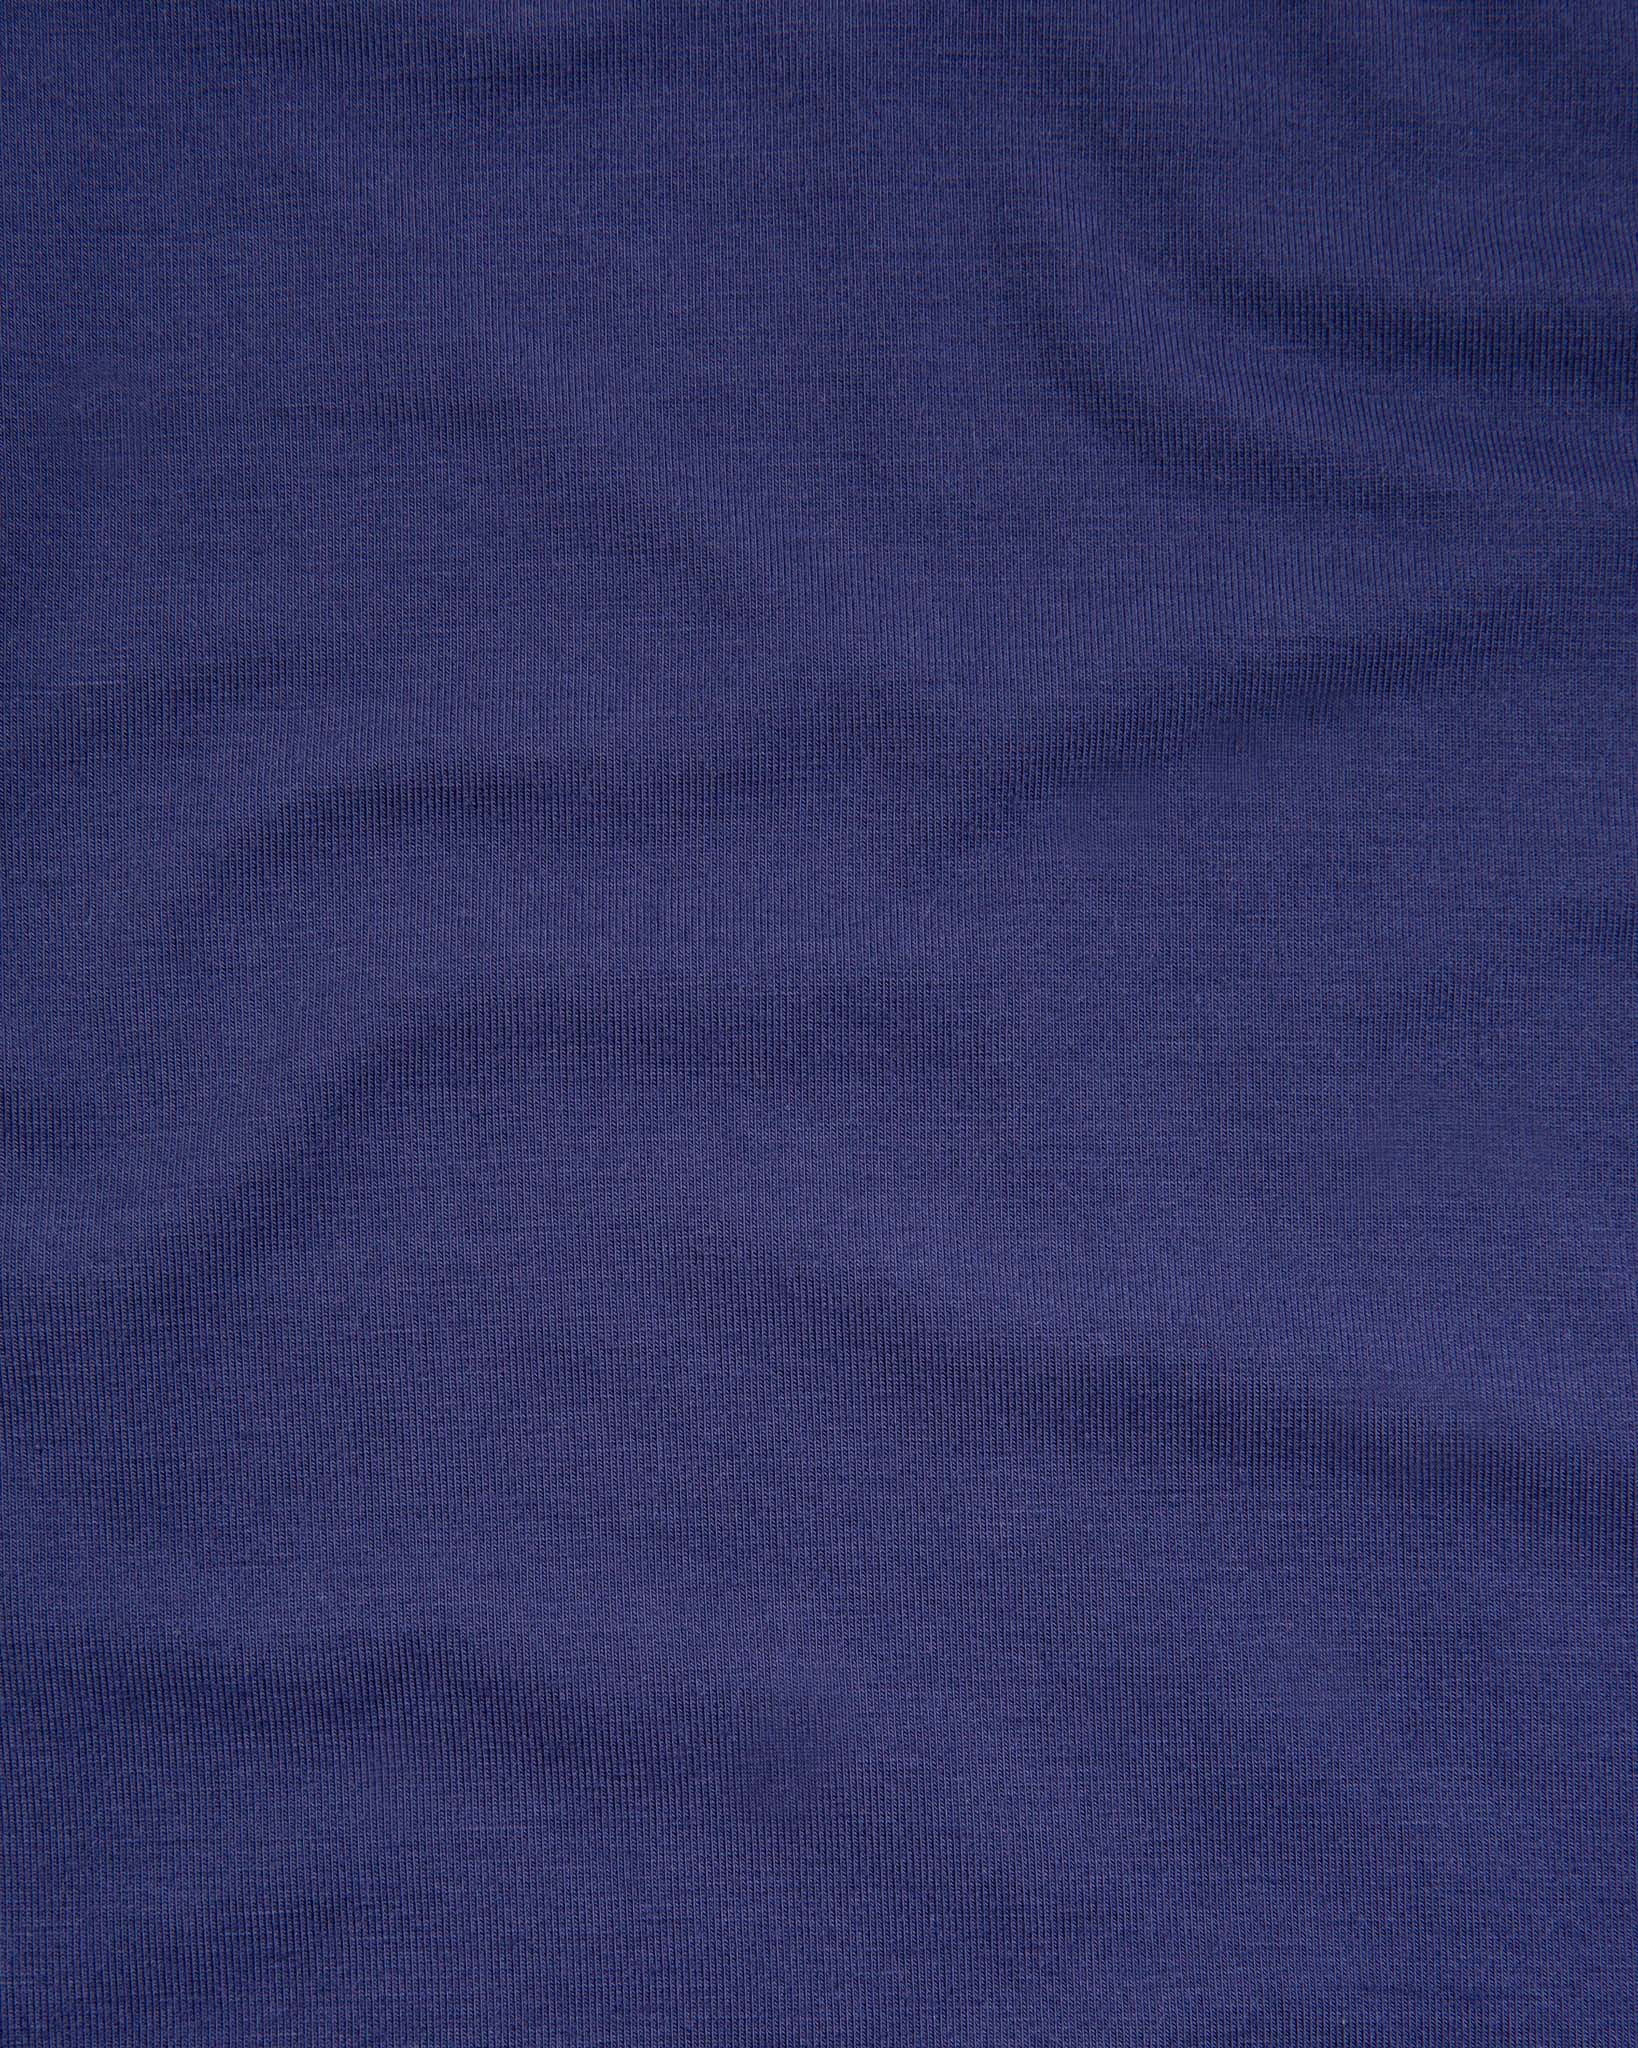 Fabric swatch of navy blue jersey made of micromodal fabric from Yawn.